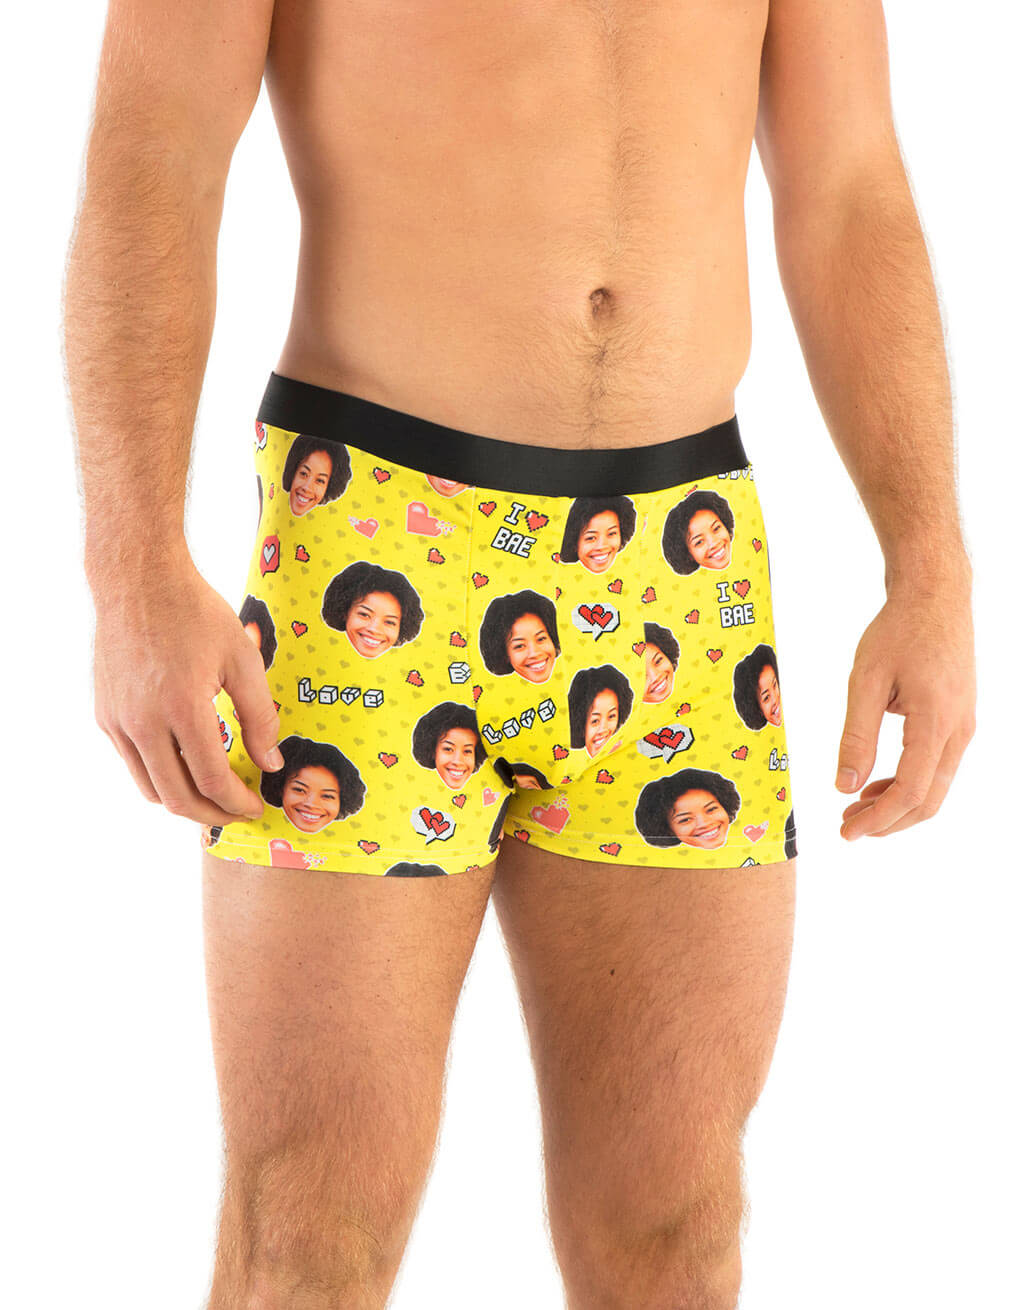 Naughty Love Hearts Custom Boxers - Personalized Boxers – Super Socks